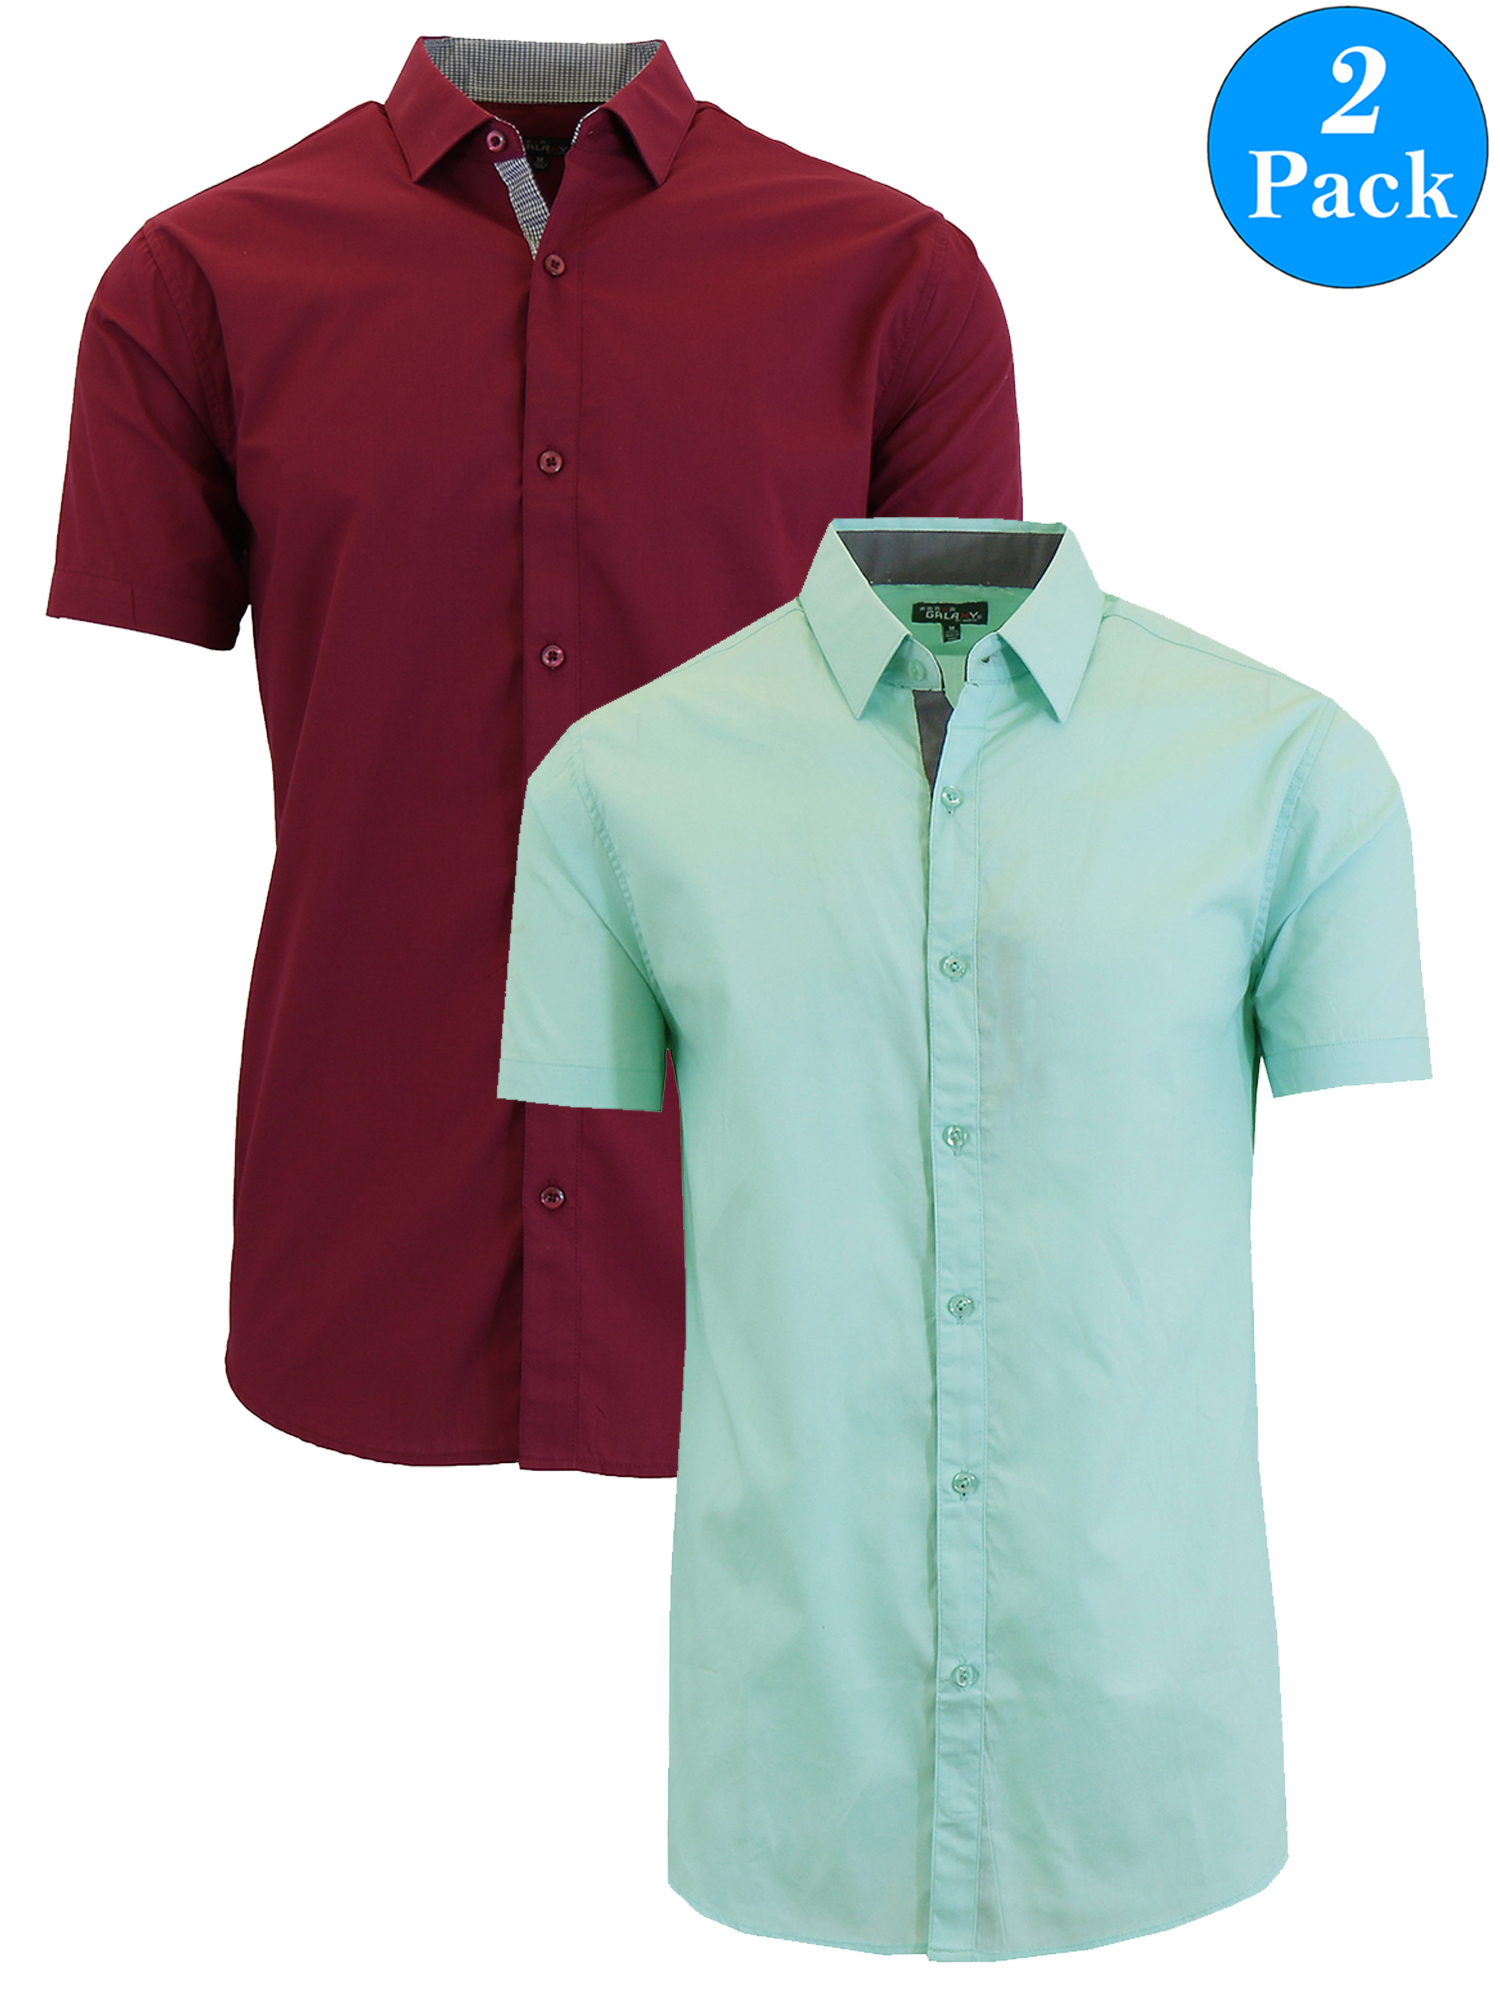 Men's 2-Pack Short Sleeve Slim-Fit Solid Dress Shirts (S-5XL) - image 1 of 2